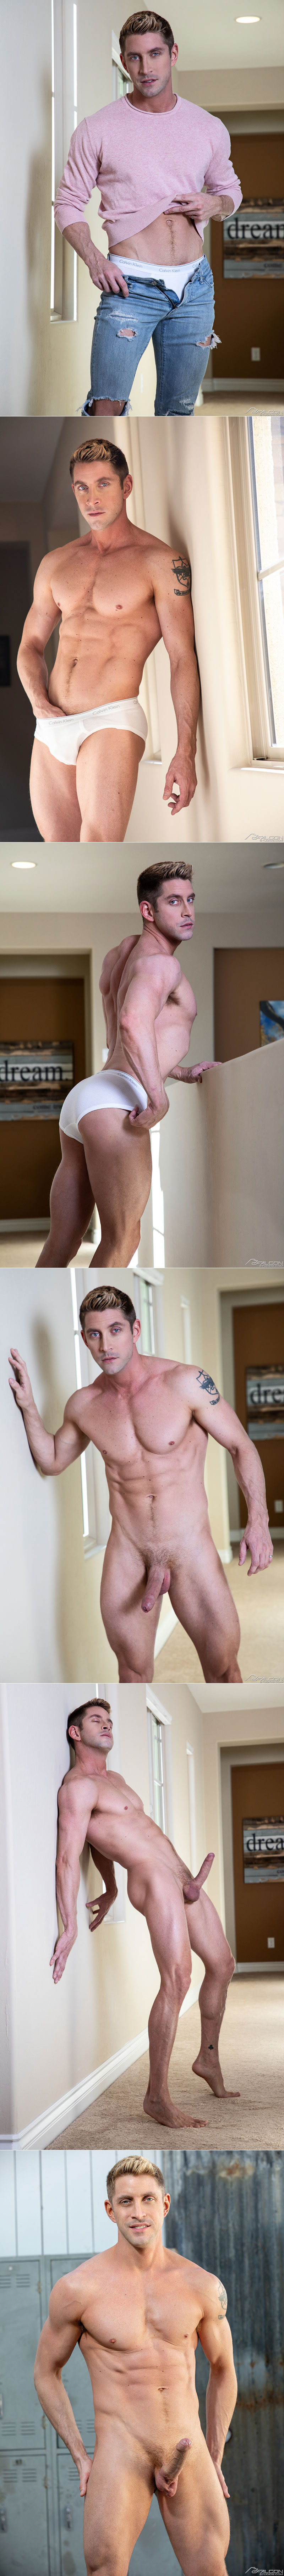 Falcon Studios: Johnny Ford works out and rubs one out in "Pumped" (“Model Behavior” Series)